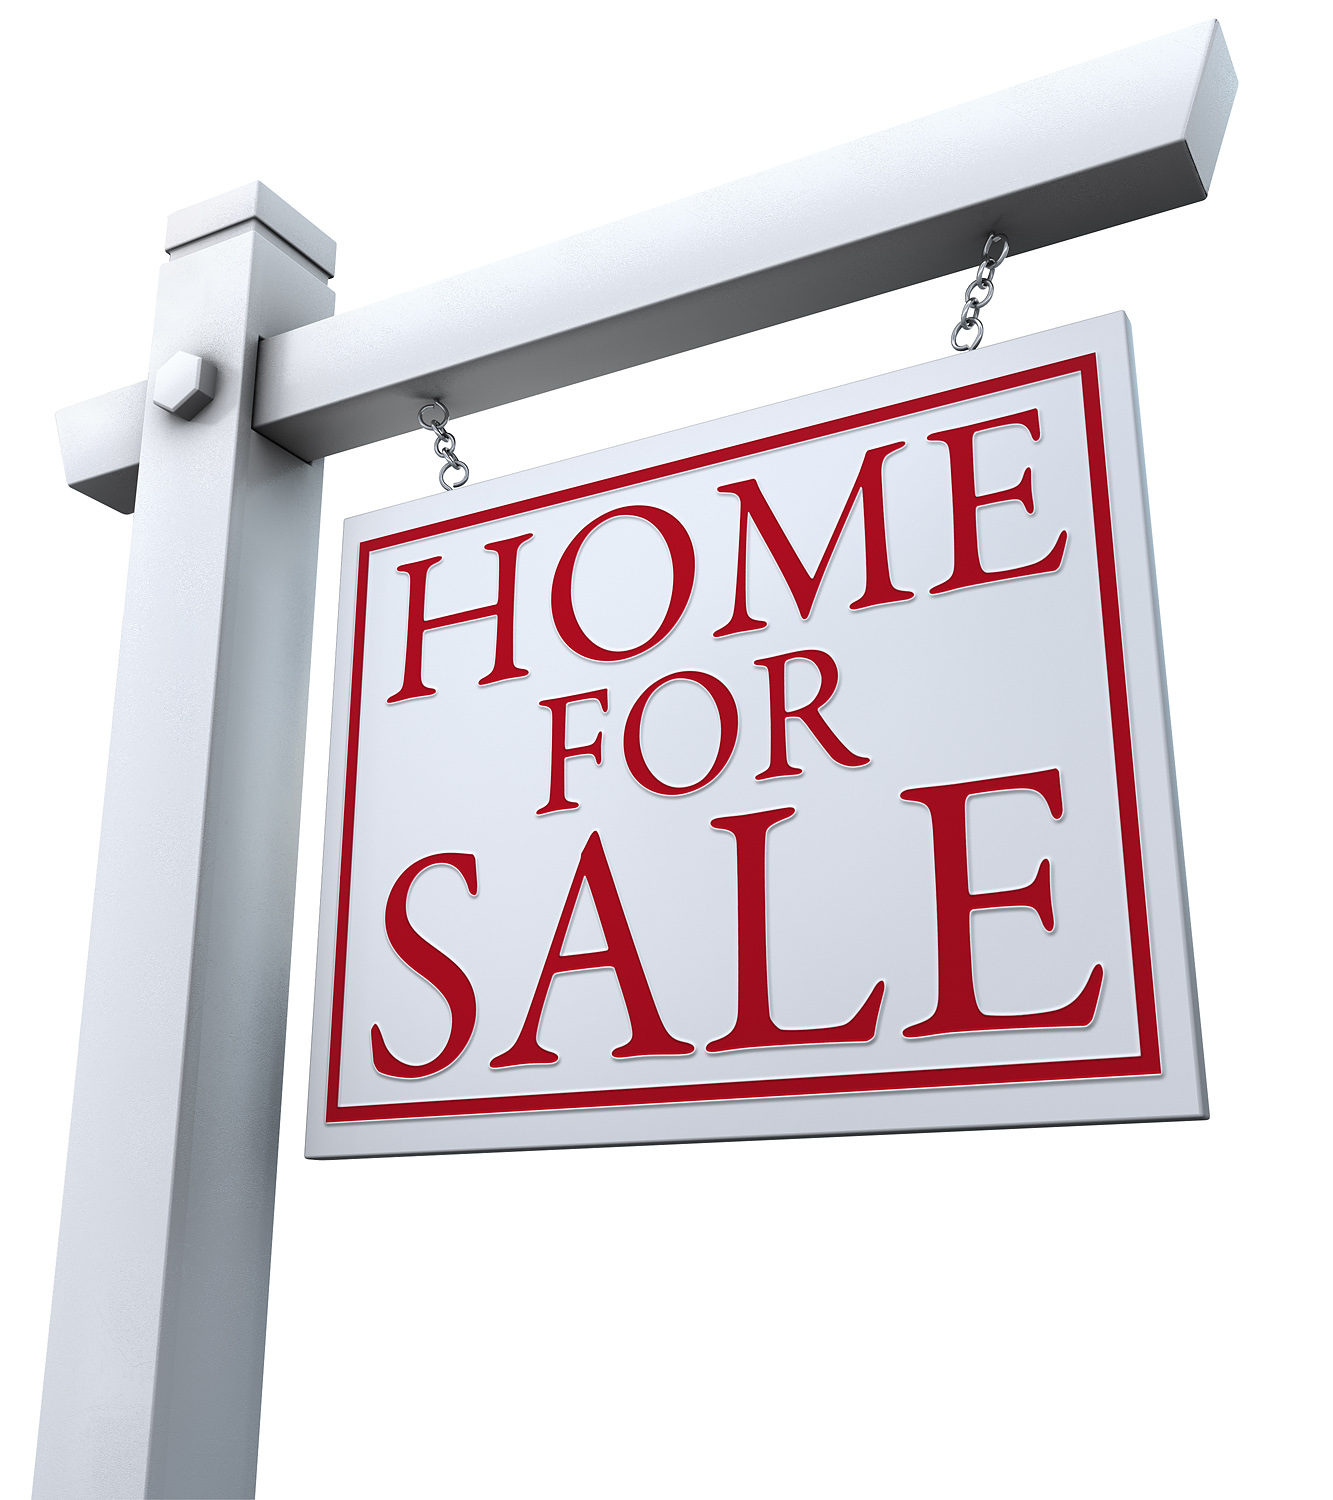 Homes For Sale Sign | Clipart Panda - Free Clipart Images